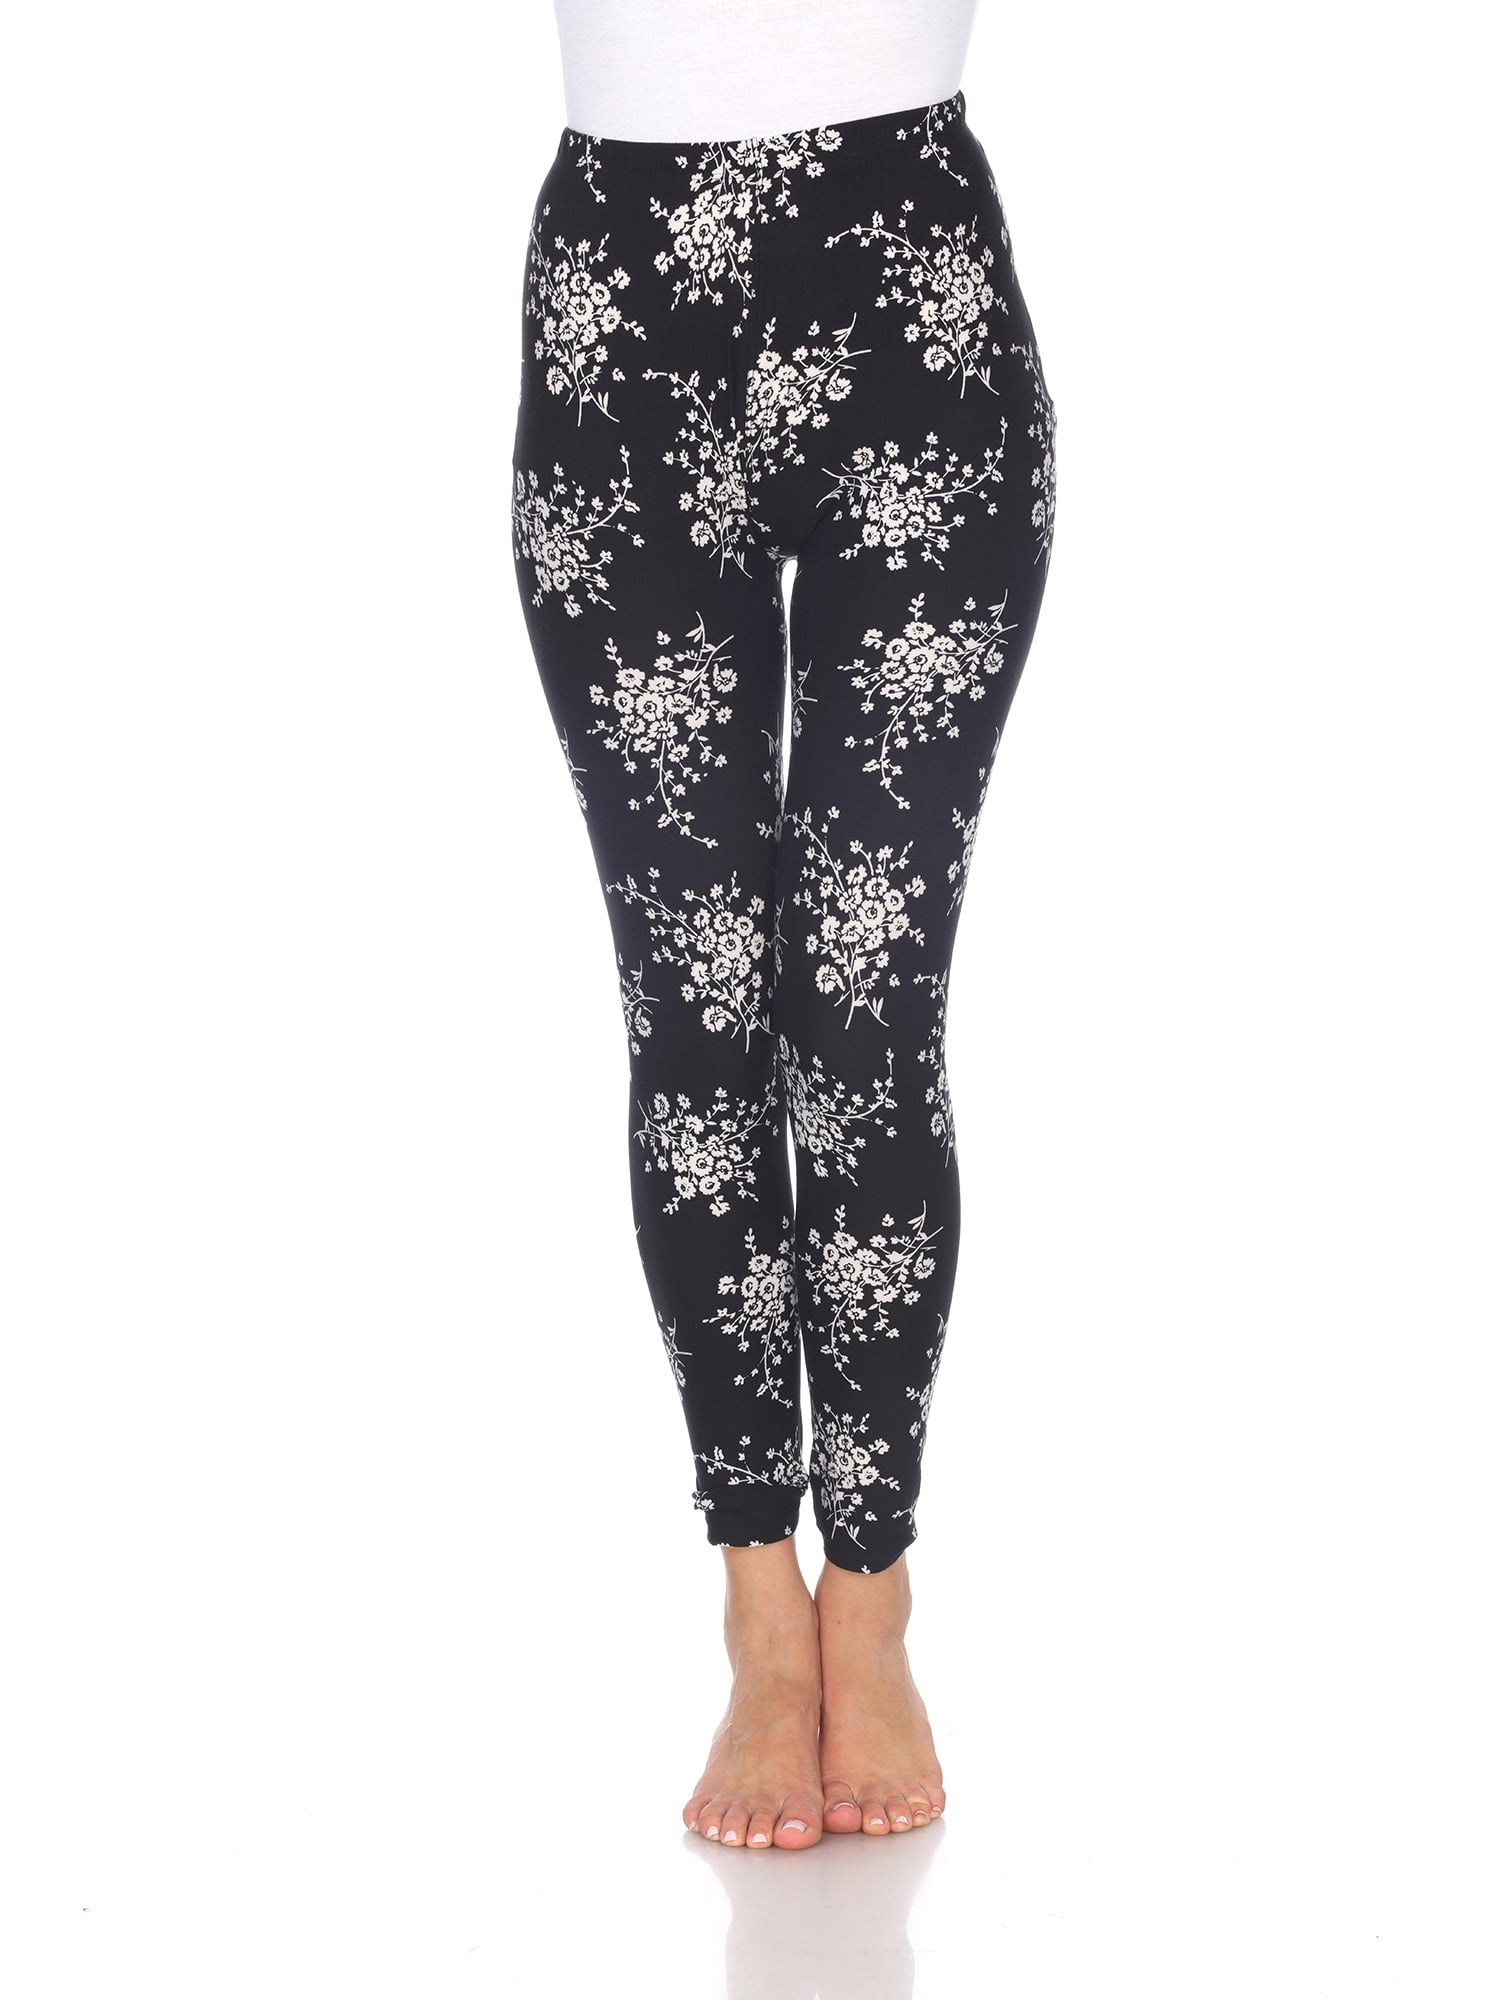 Kitty Cat Holiday Snowflakes Women's Leggings OS One Size 2-12 Super Soft 